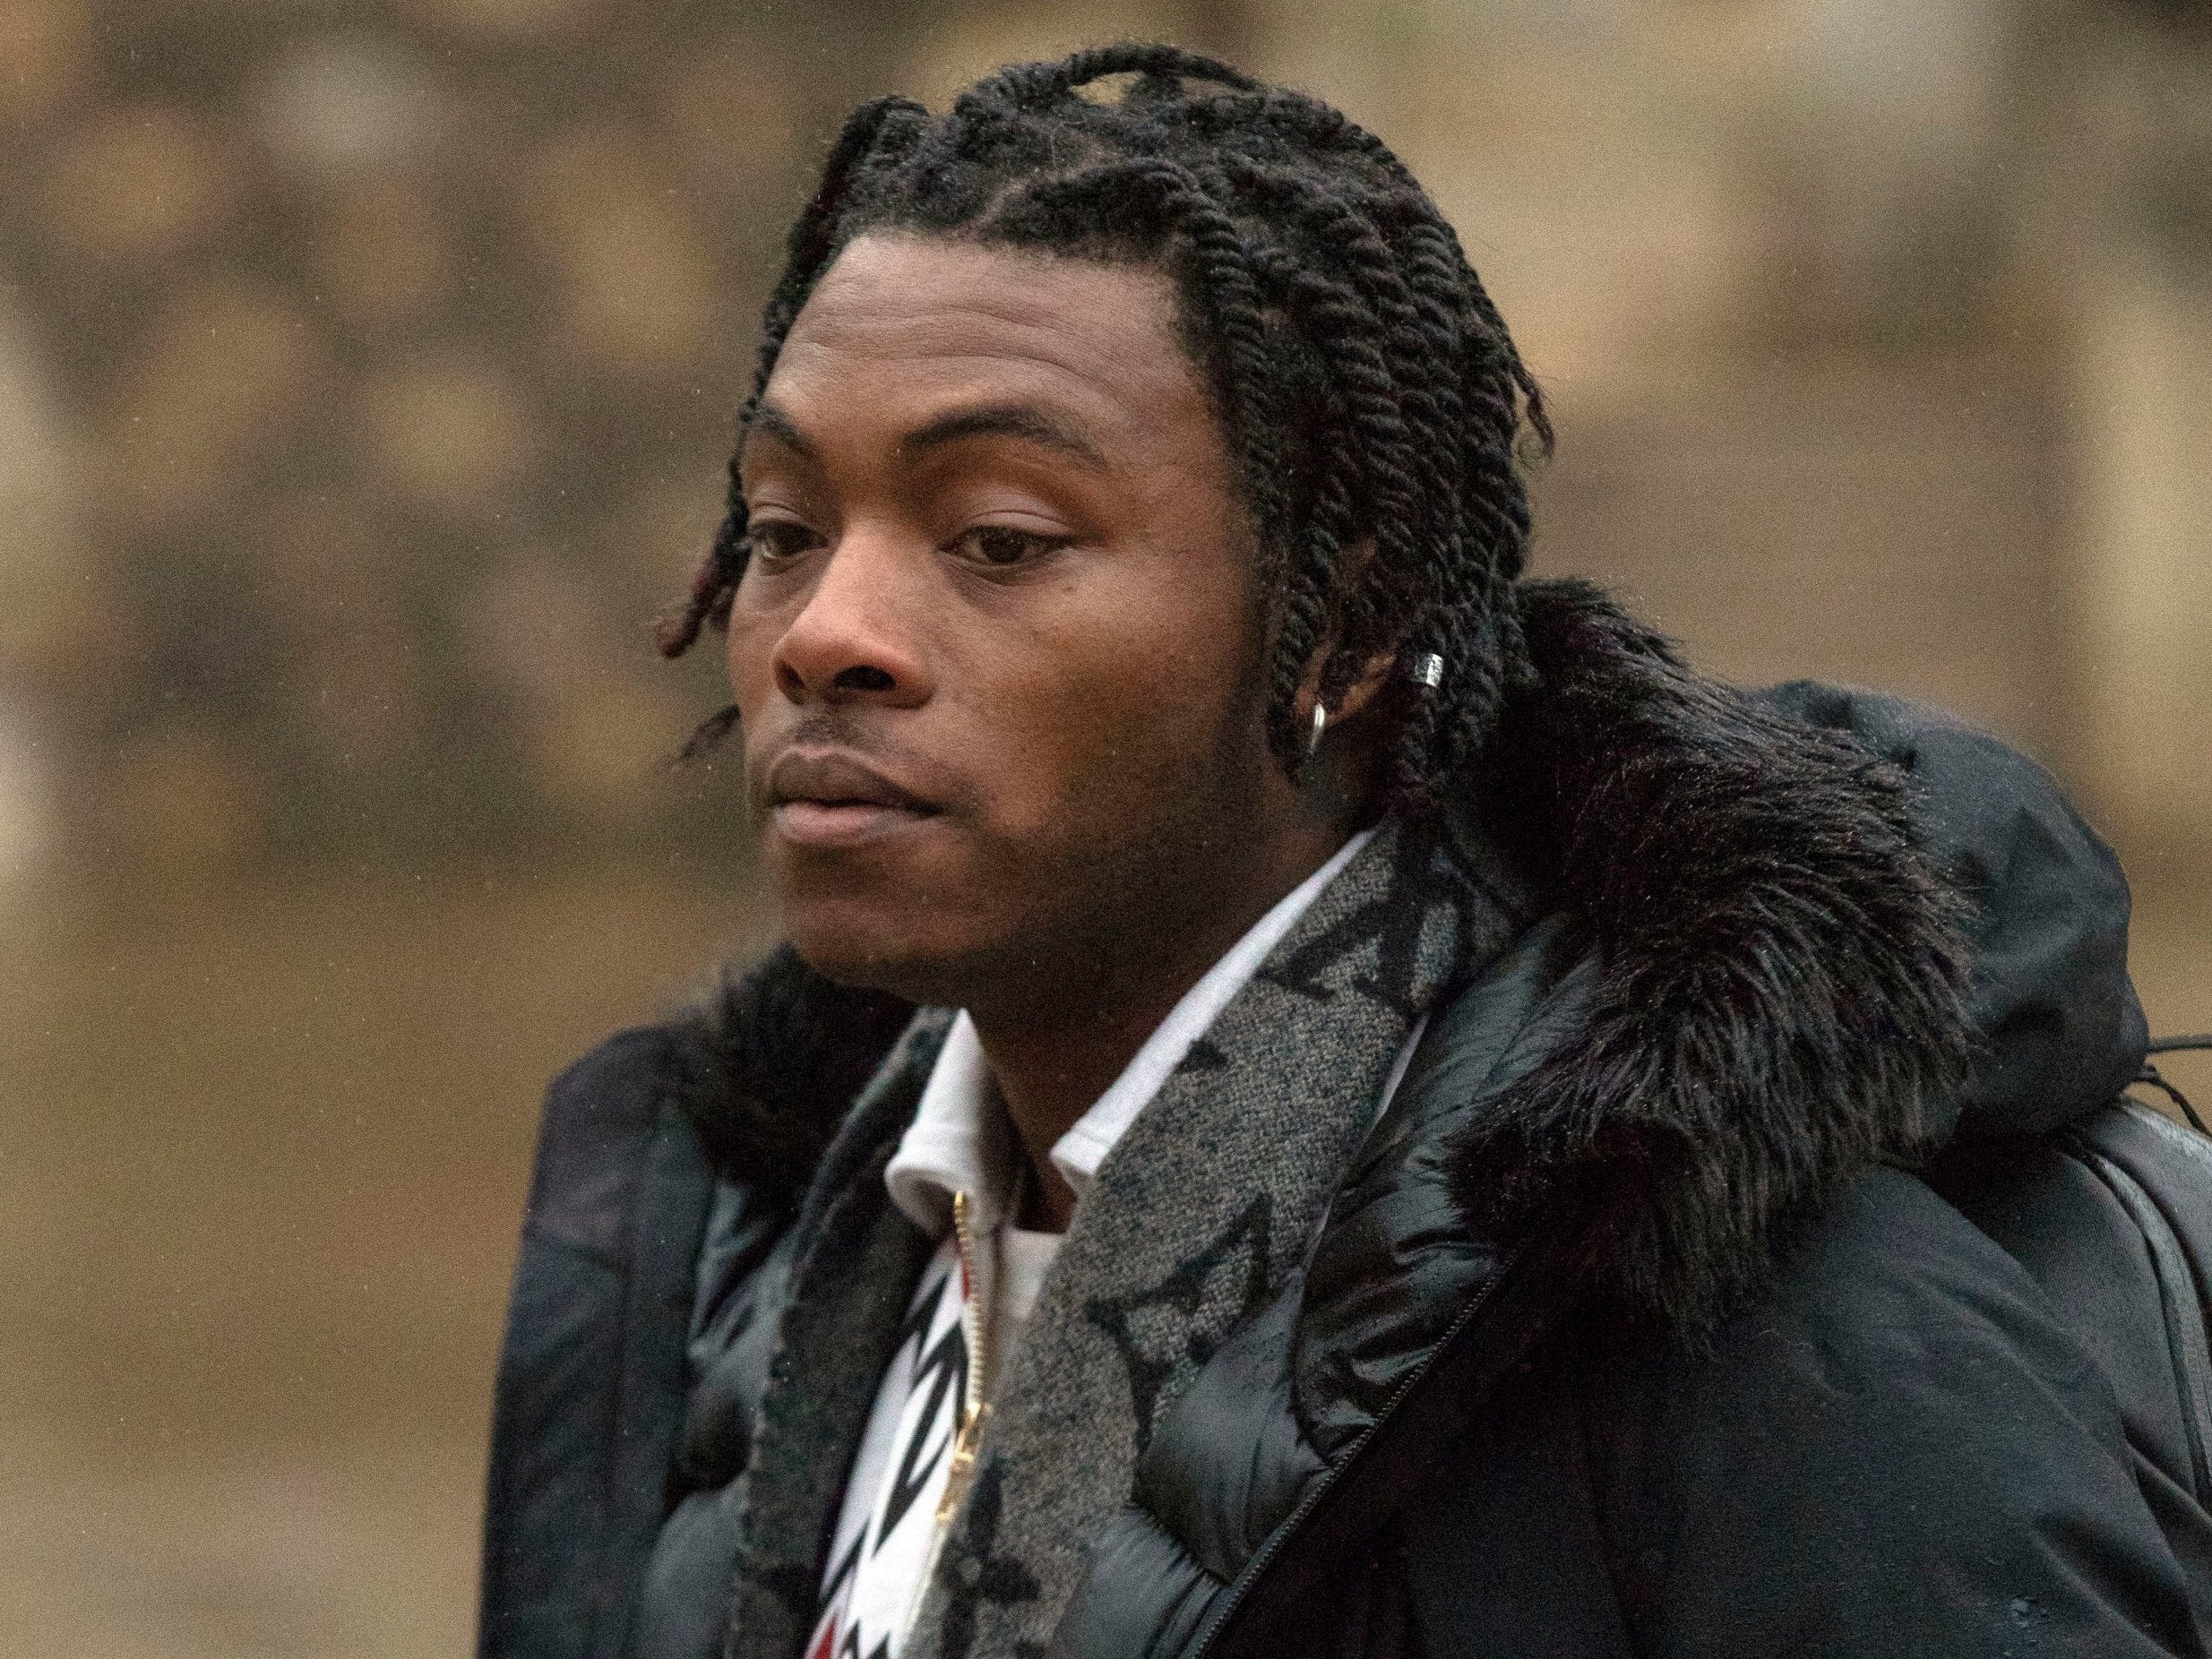 Ceon Broughton, 29, arrives at Winchester Crown Court on 4 February, 2019, where he is charged in connection with the death of Michie Fletcher-Michie.